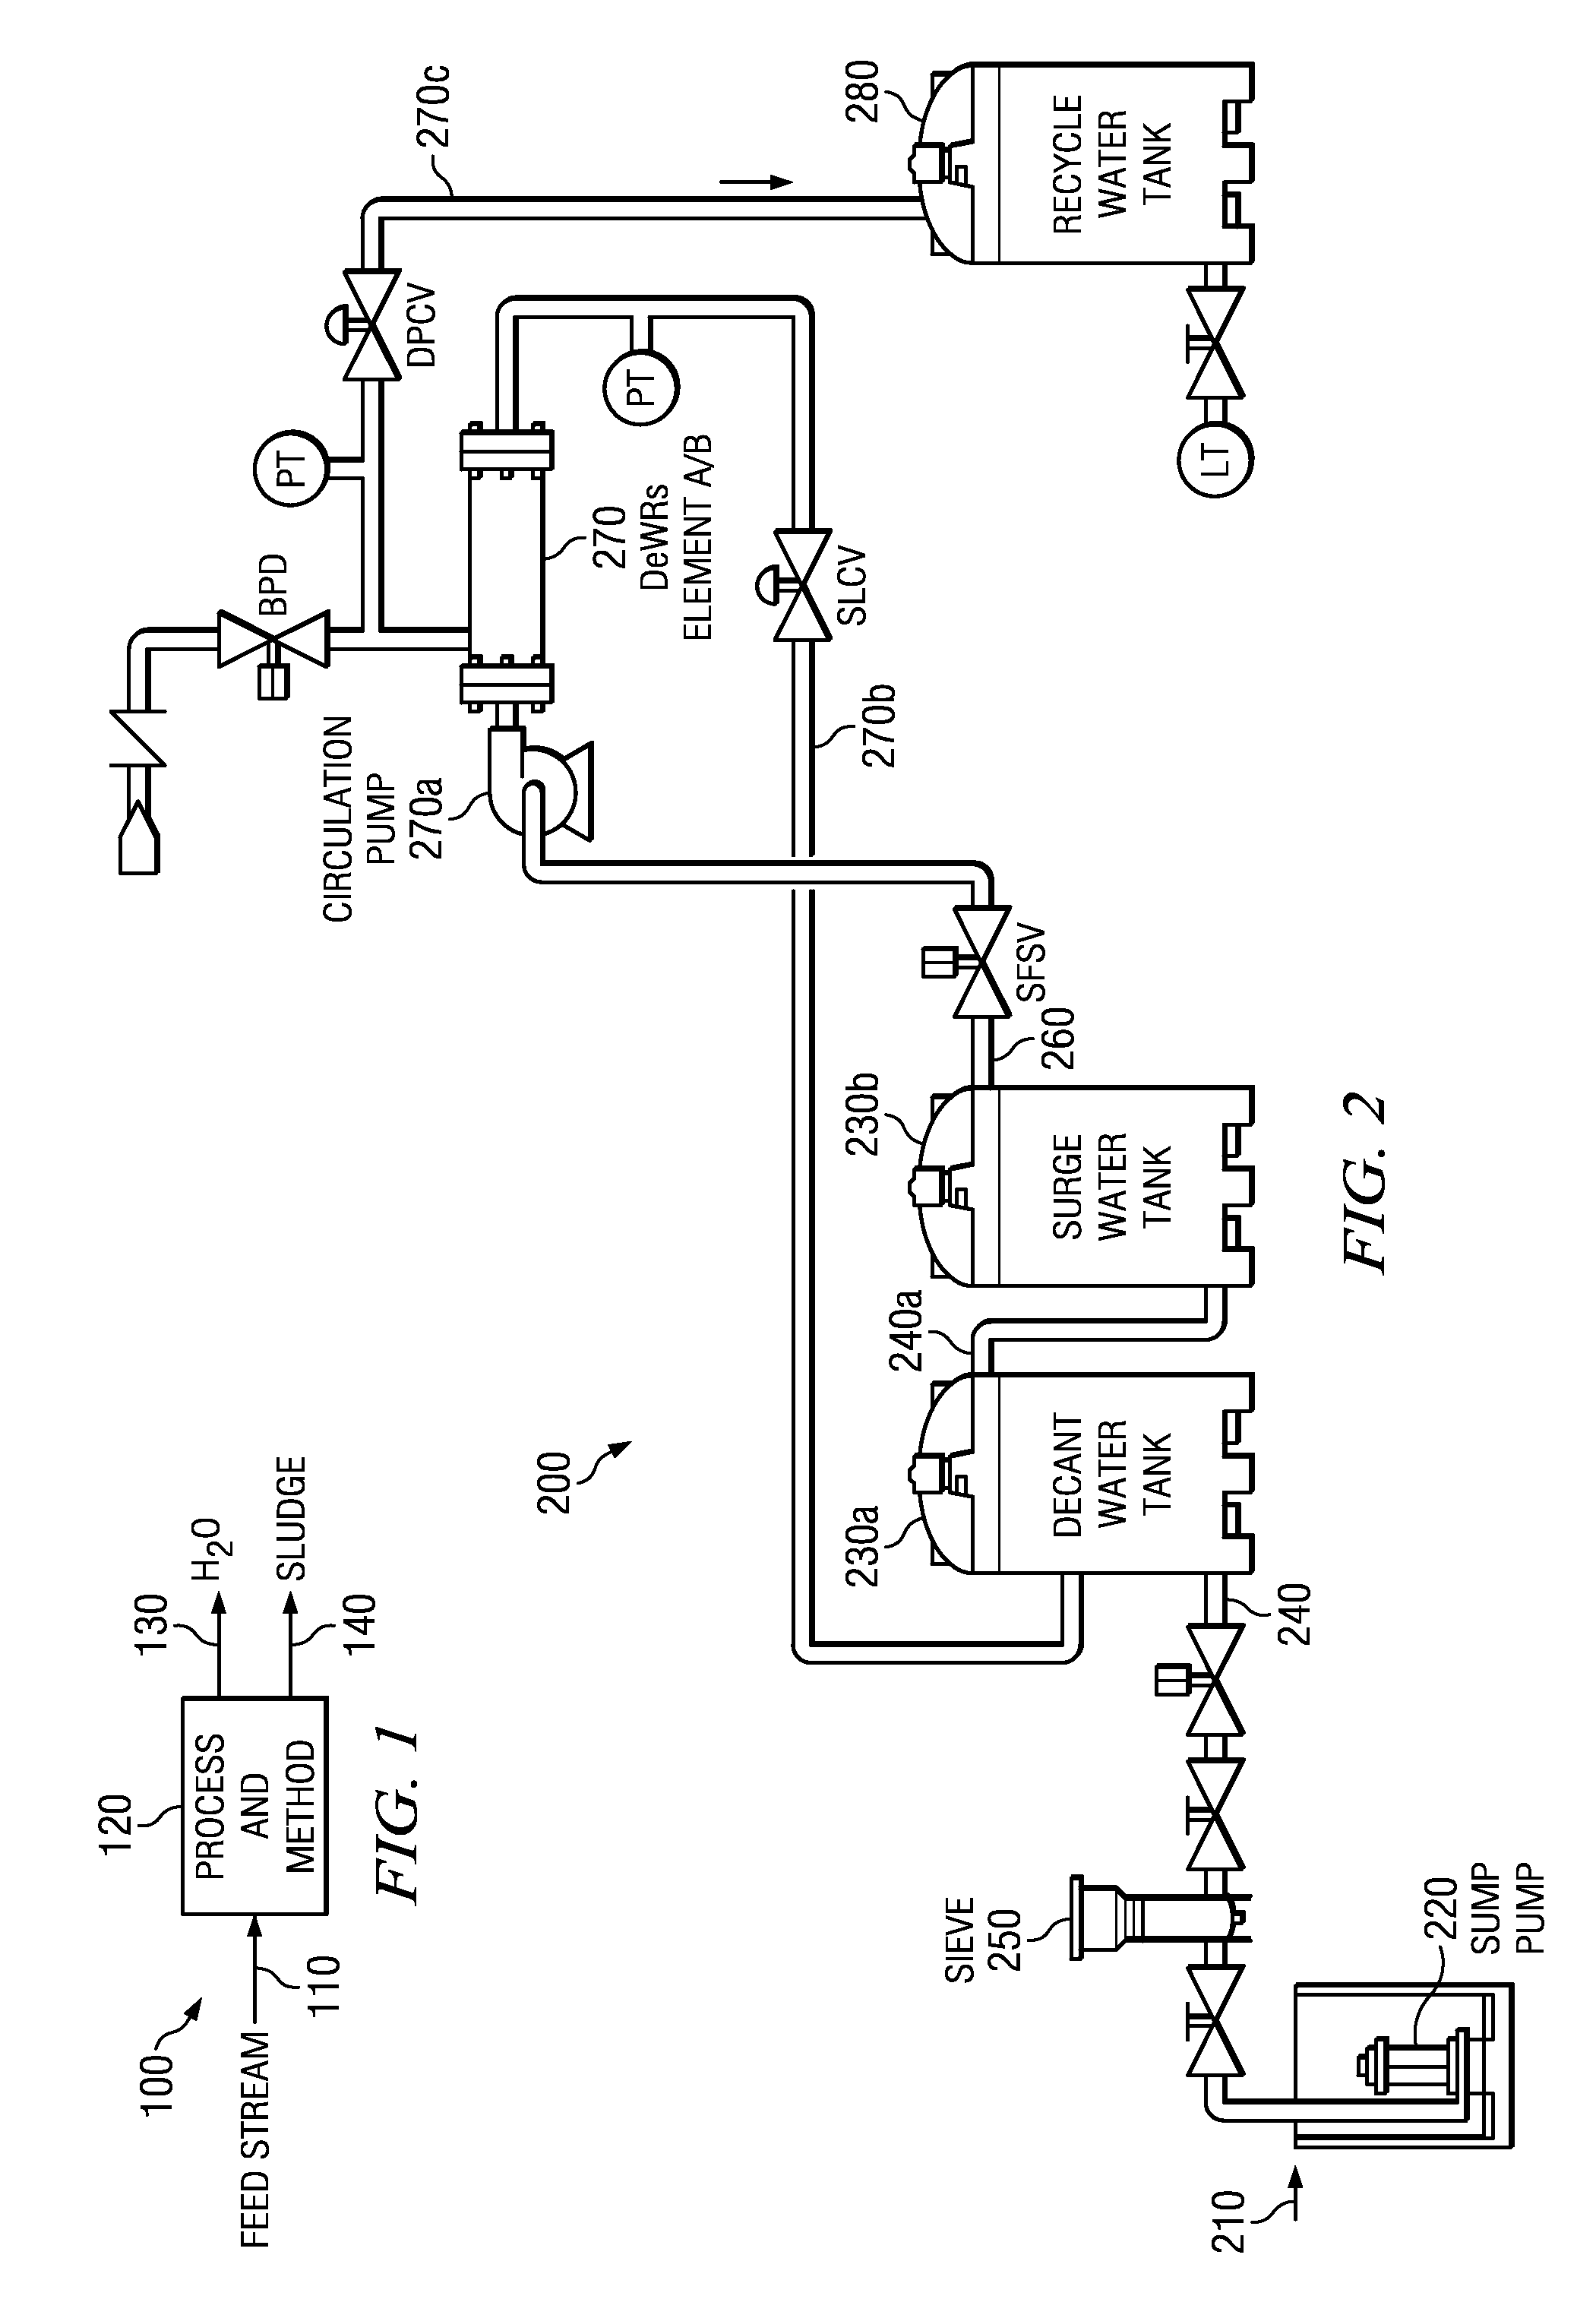 Integrated particulate filtration and dewatering system